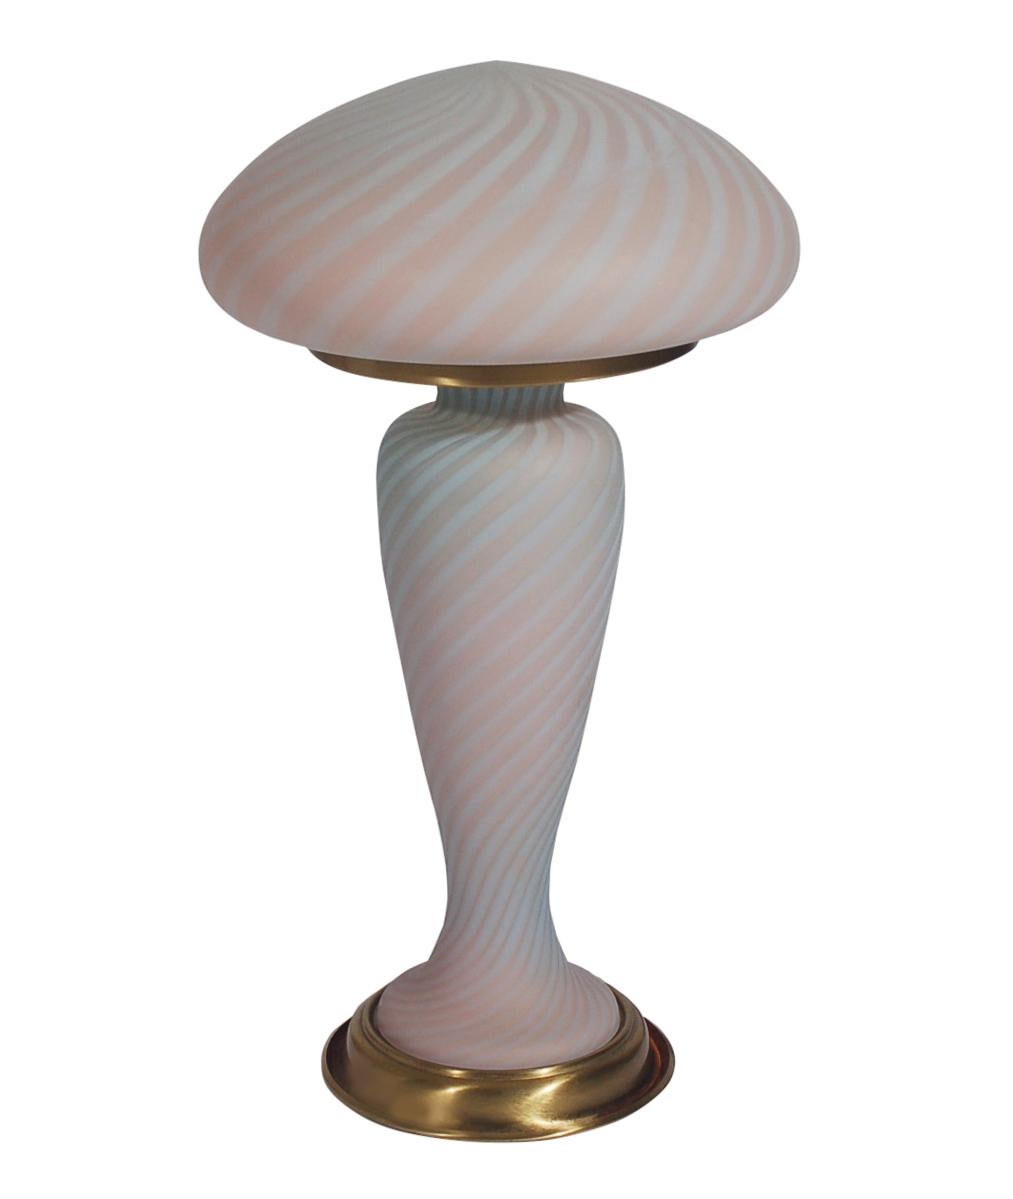 A vintage art glass lamp from Italy circa 1950s attributed to Murano. It features a two part swirled art glass design with brass details. Tested and working.